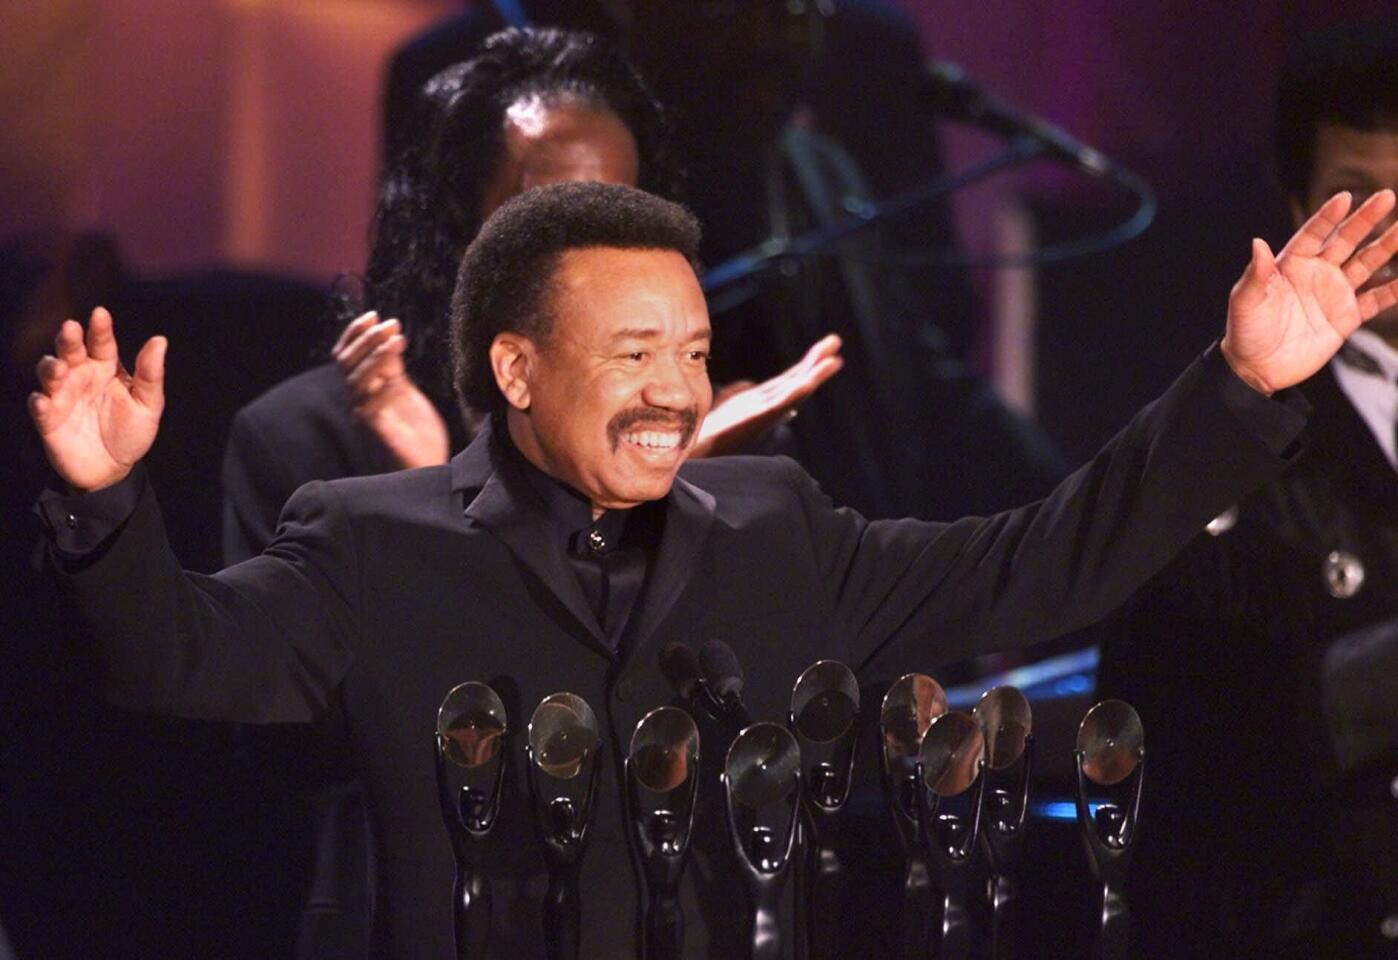 Maurice White acknowledges applause as Earth, Wind & Fire is inducted into the Rock and Roll Hall of Fame on March 6, 2000.